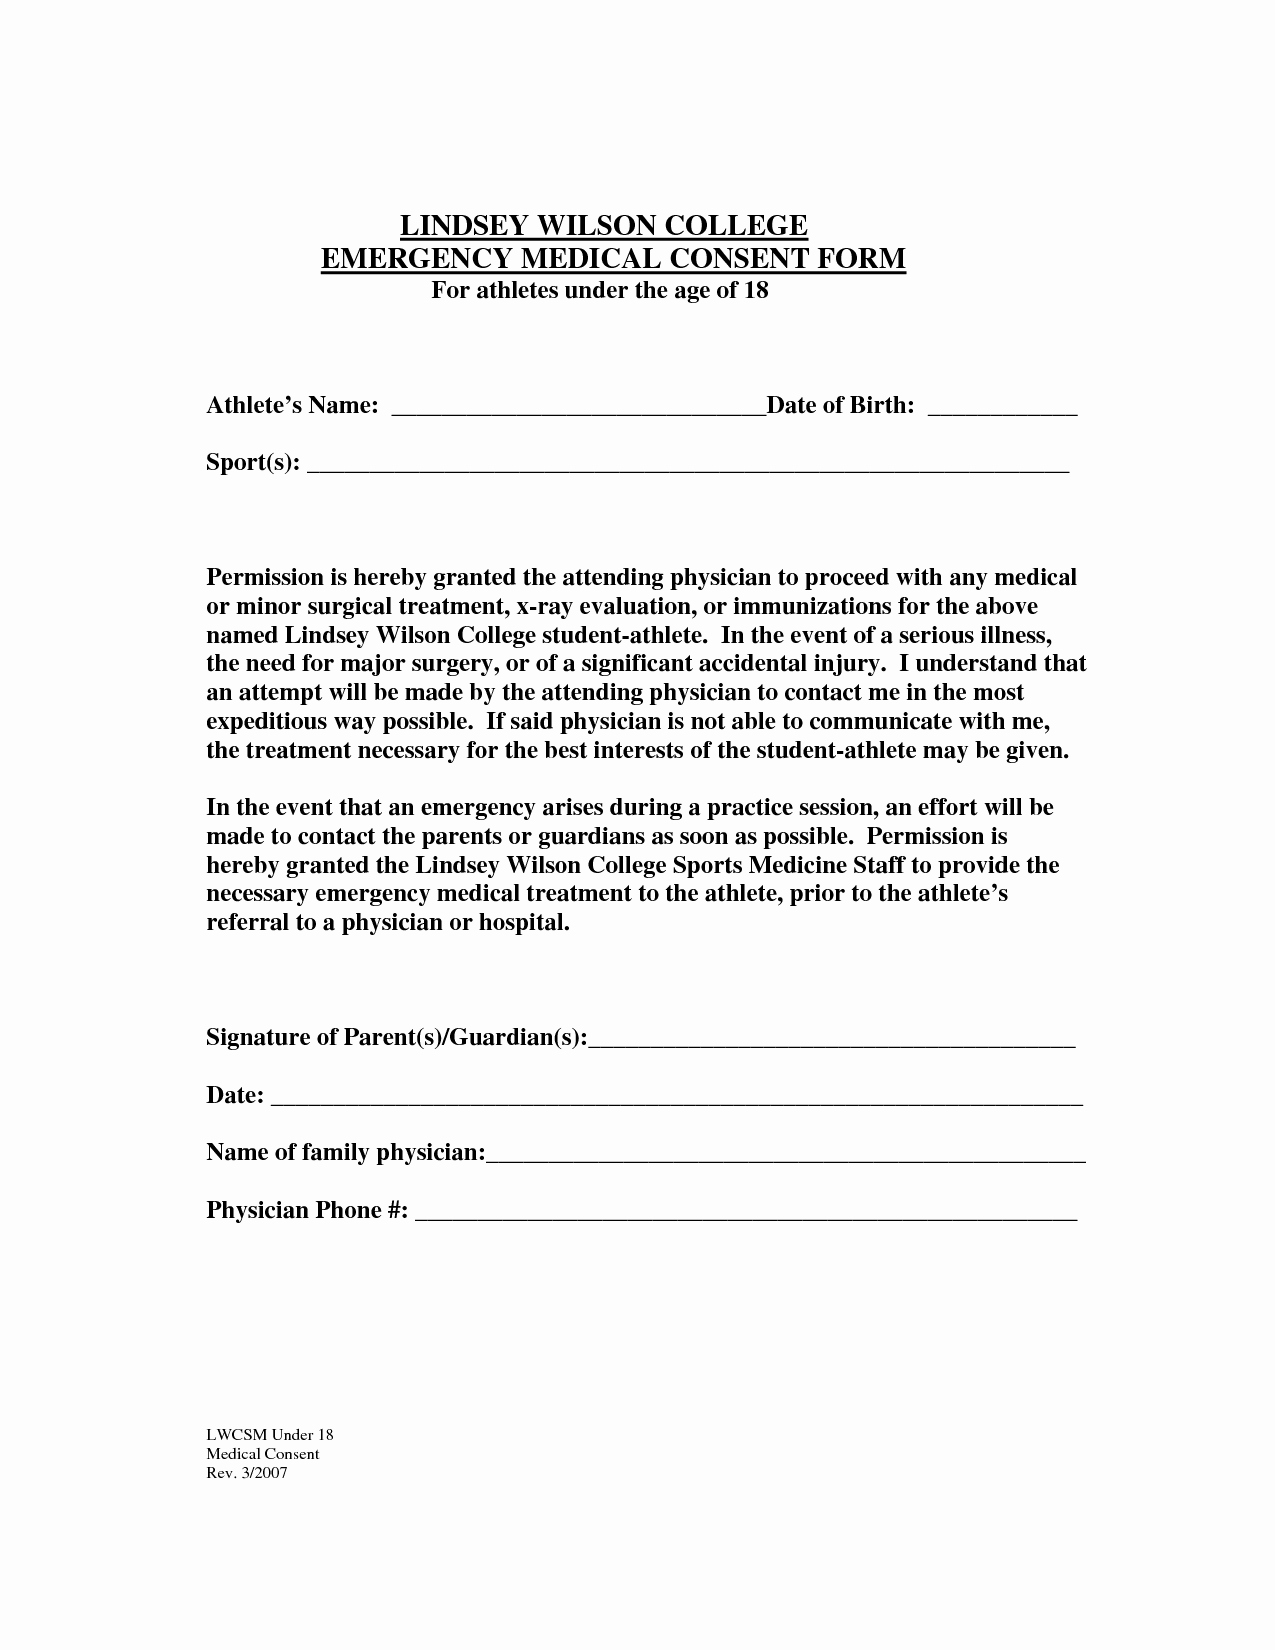 Generic Medical Consent form for Minor